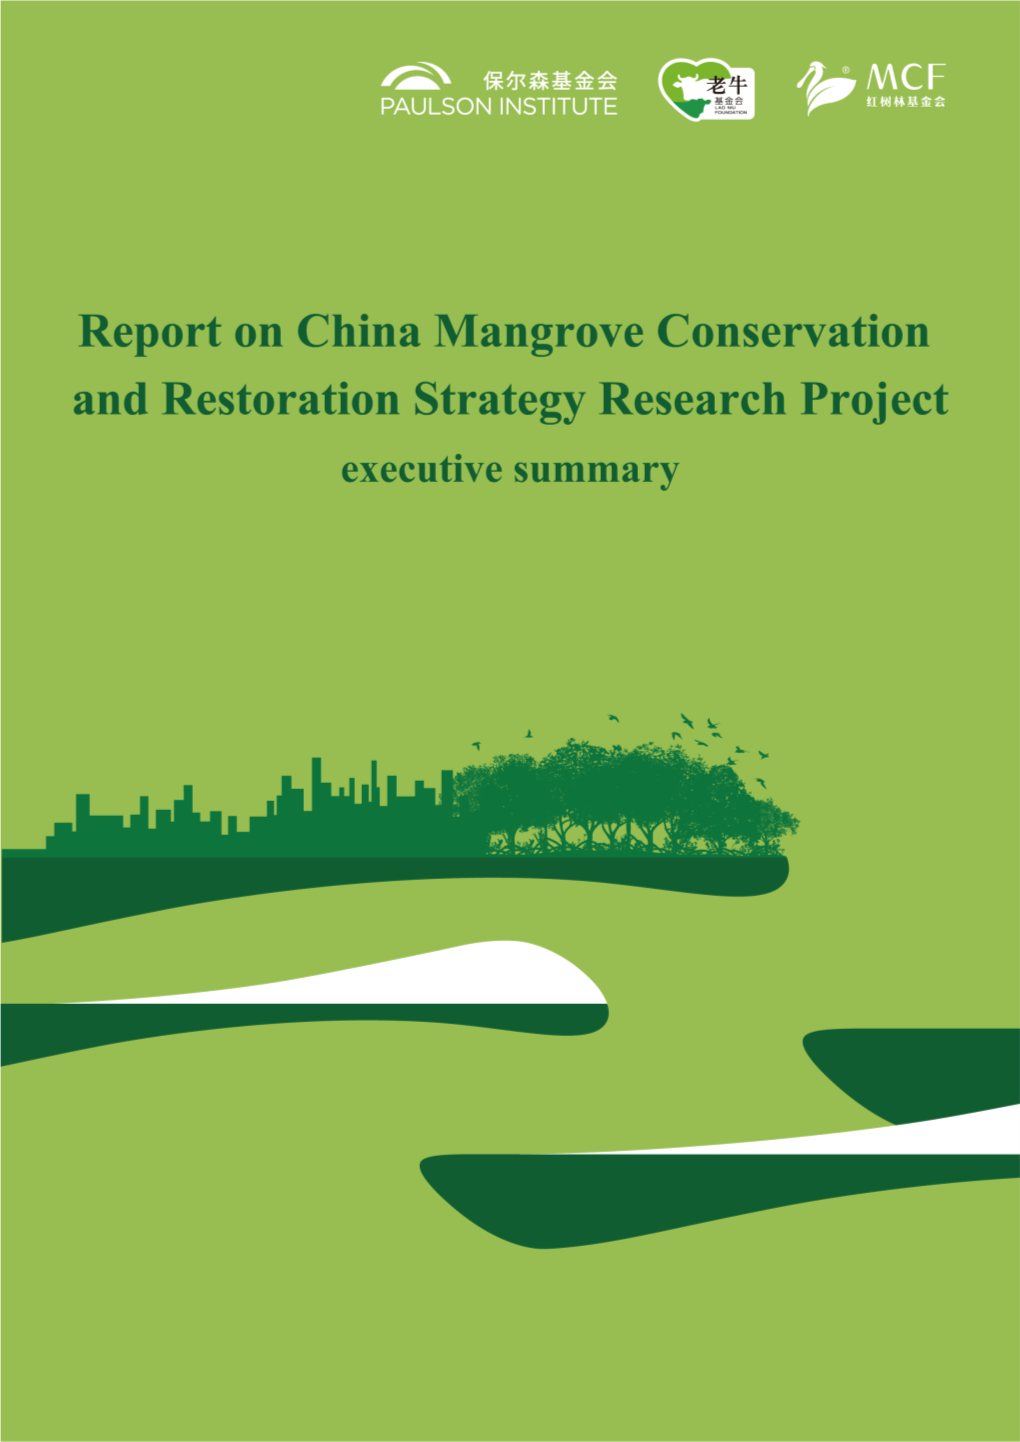 Report on China's Mangrove Conservation